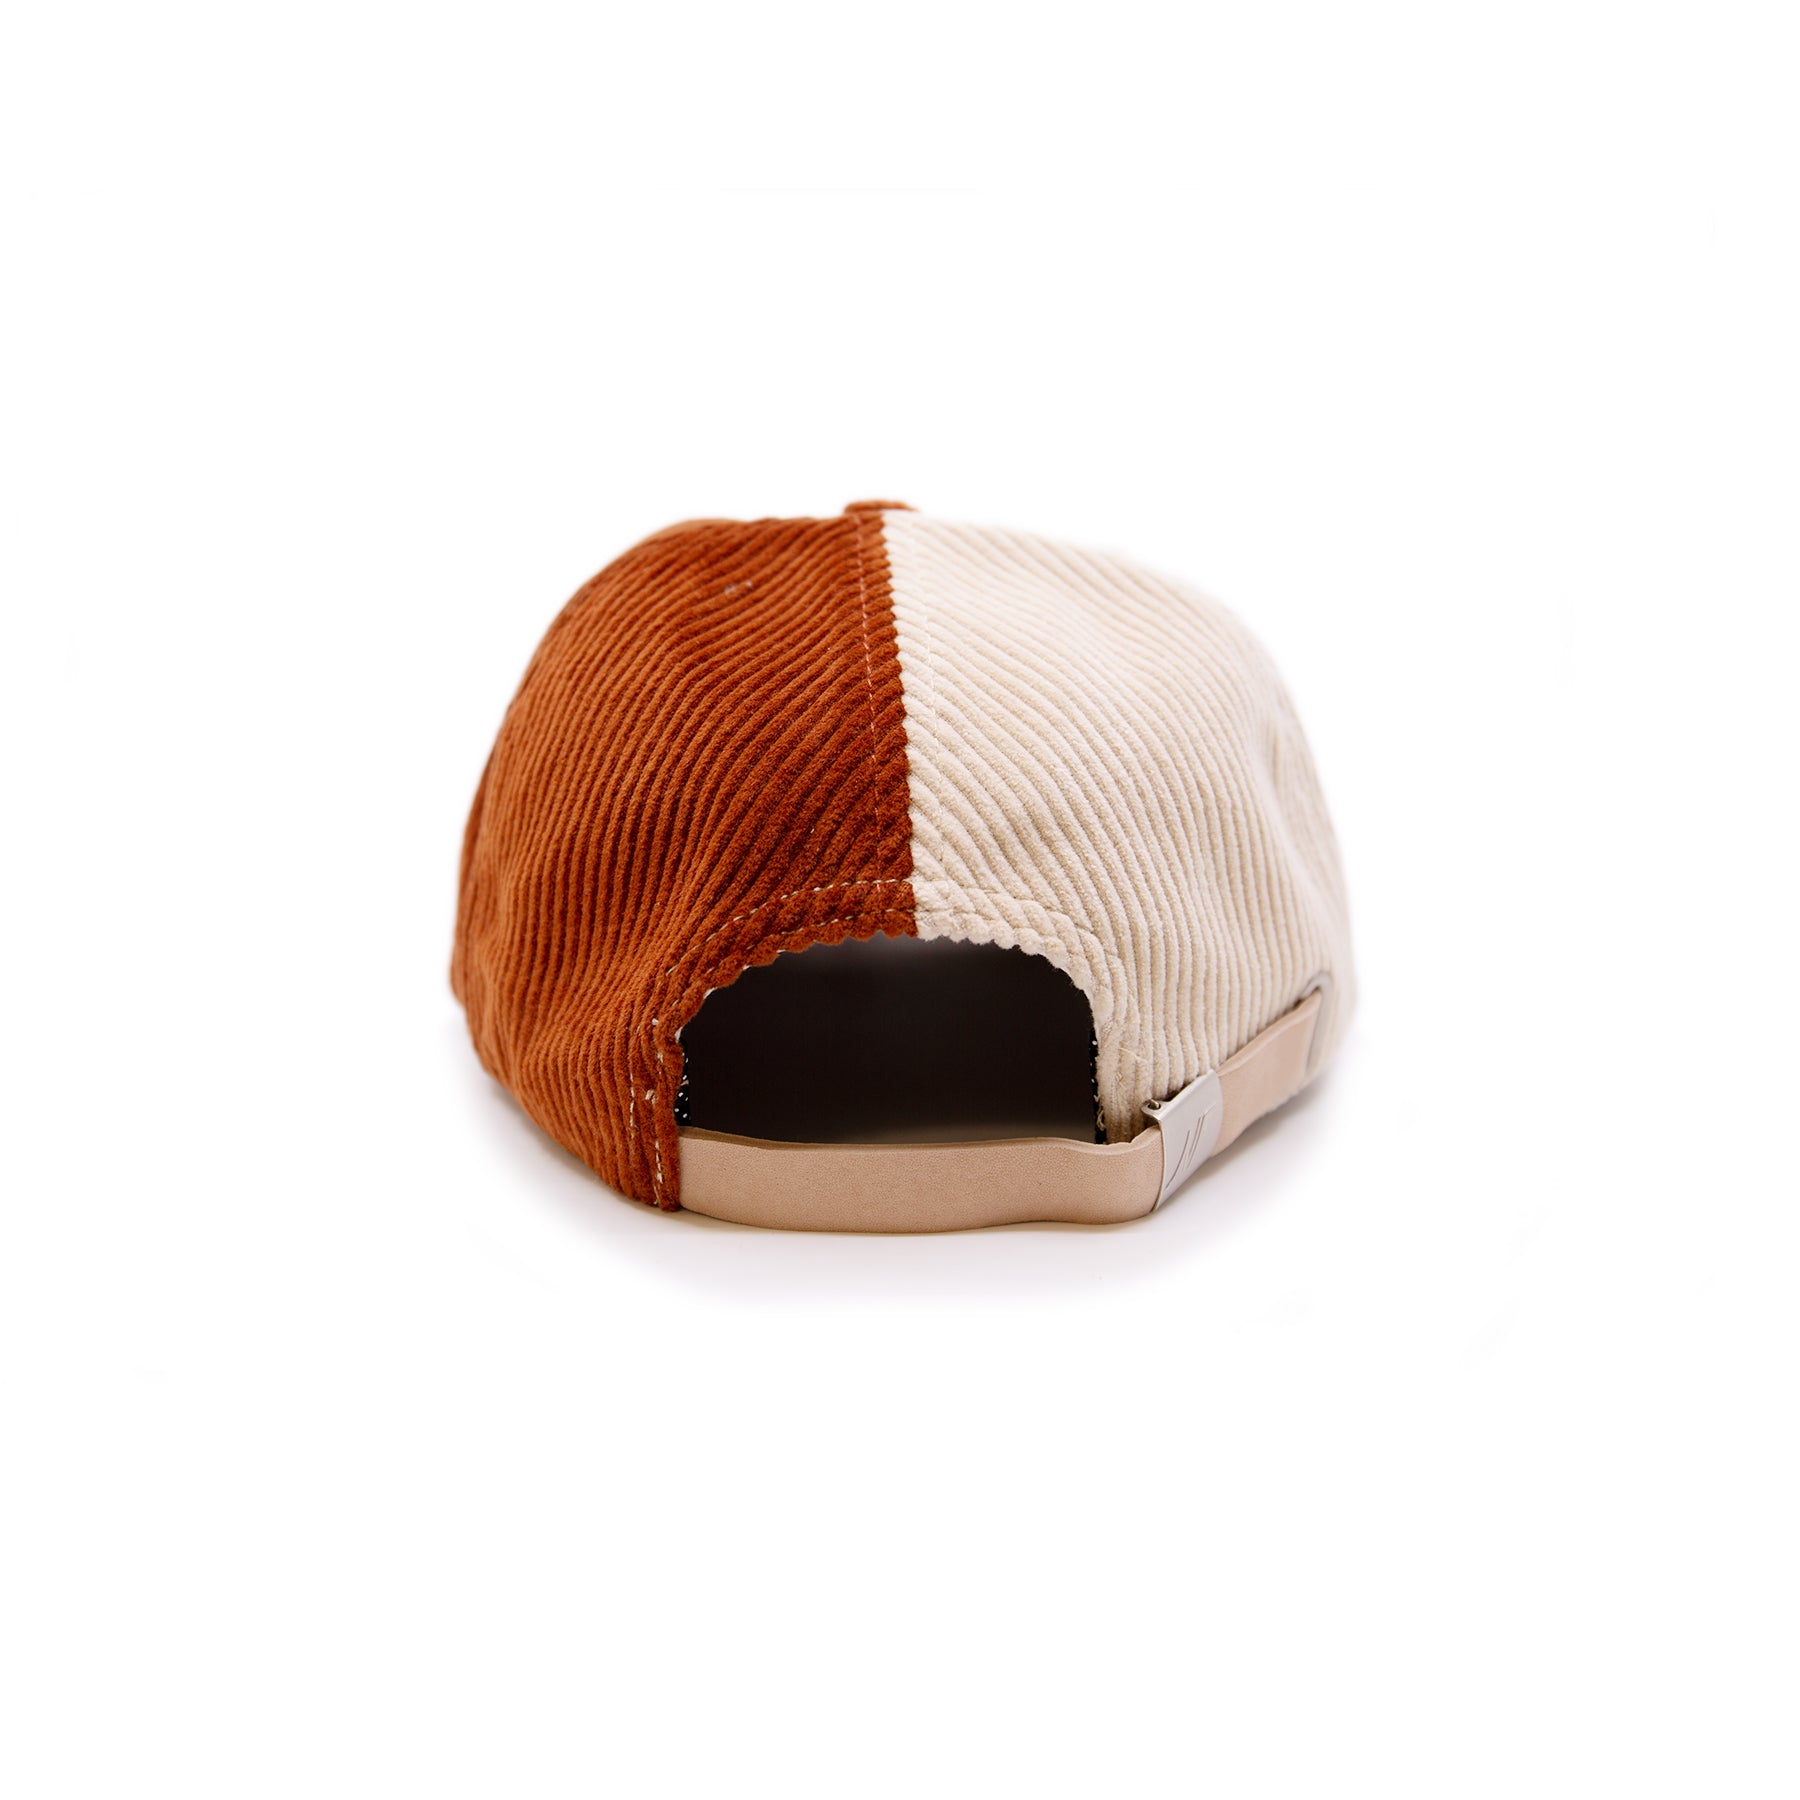 PSG CAP 100% corduroy baseball cap in Camel/Cream  Multicolor N----F embroidery  Tan suede adjuster strap  Made in USA